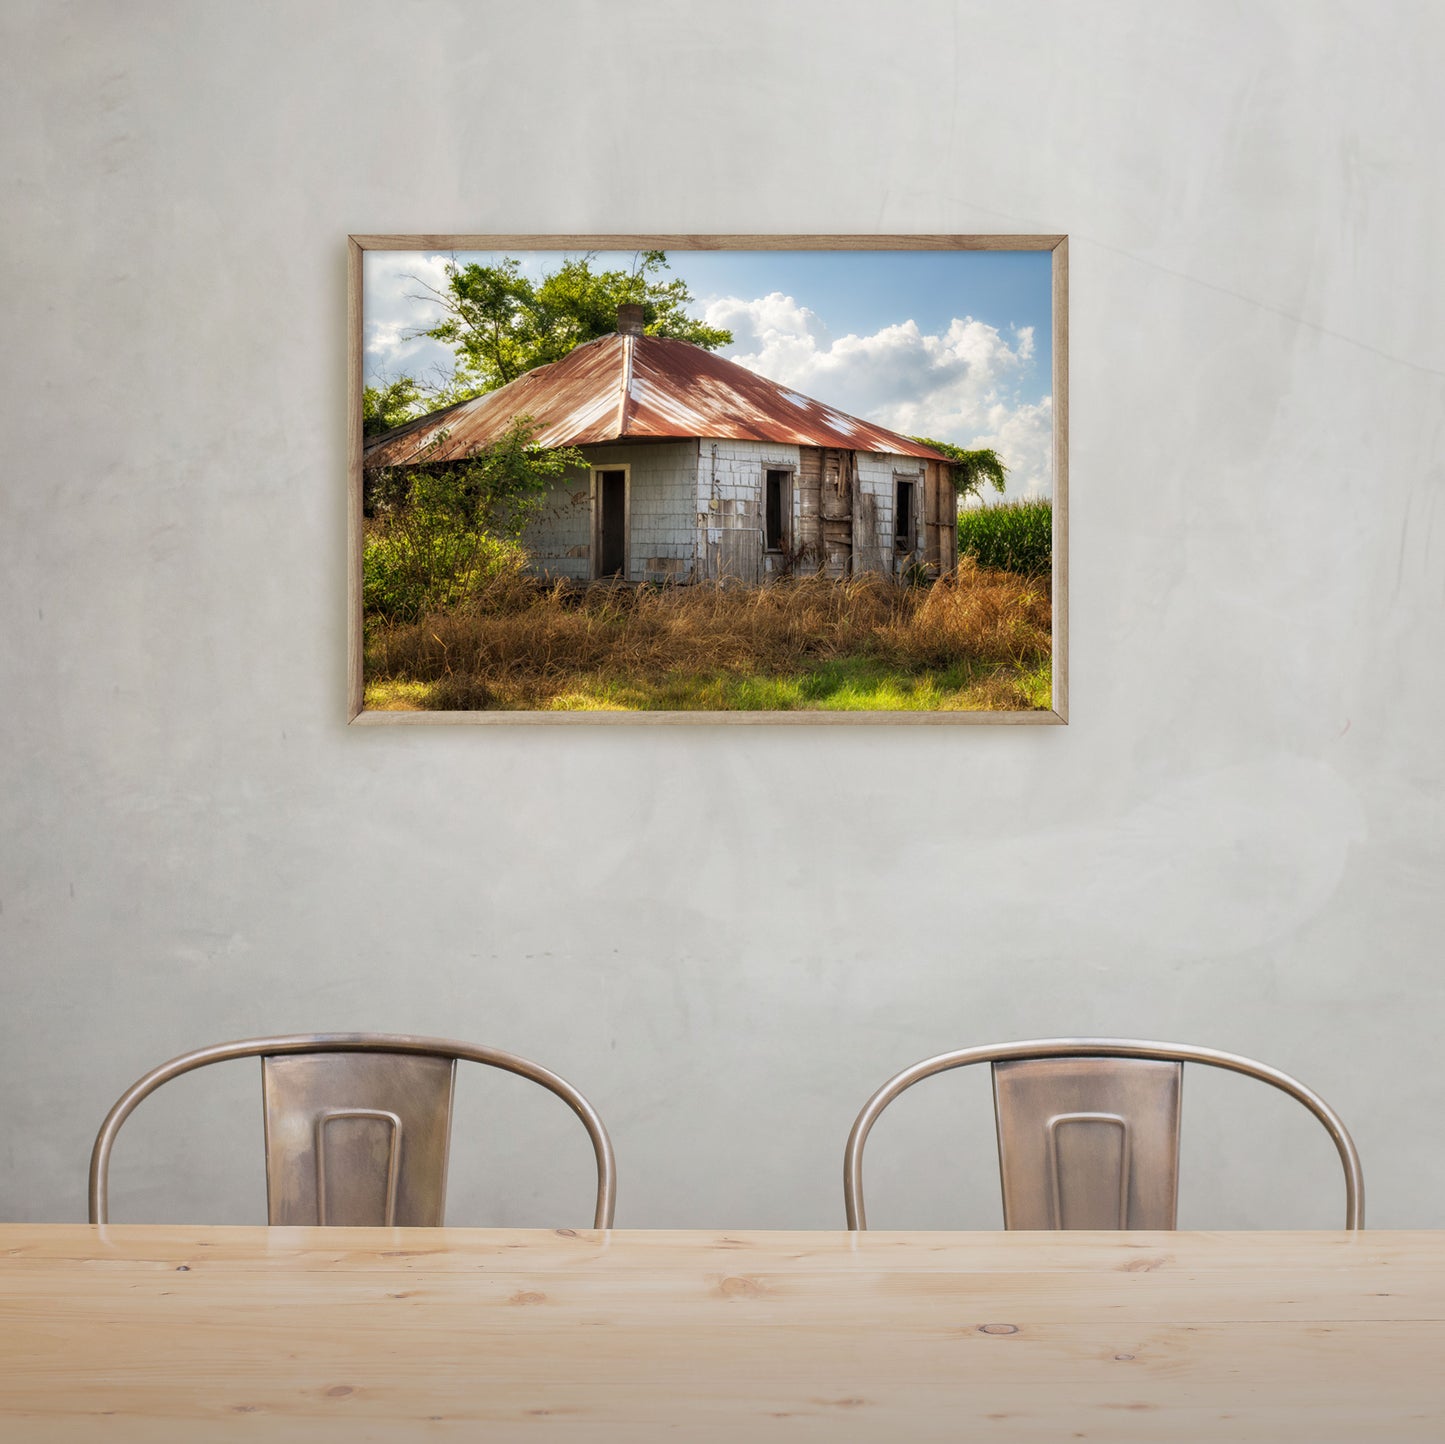 High-resolution print of a Mississippi Delta sharecroppers cottage, highlighting its rustic charm and natural setting.